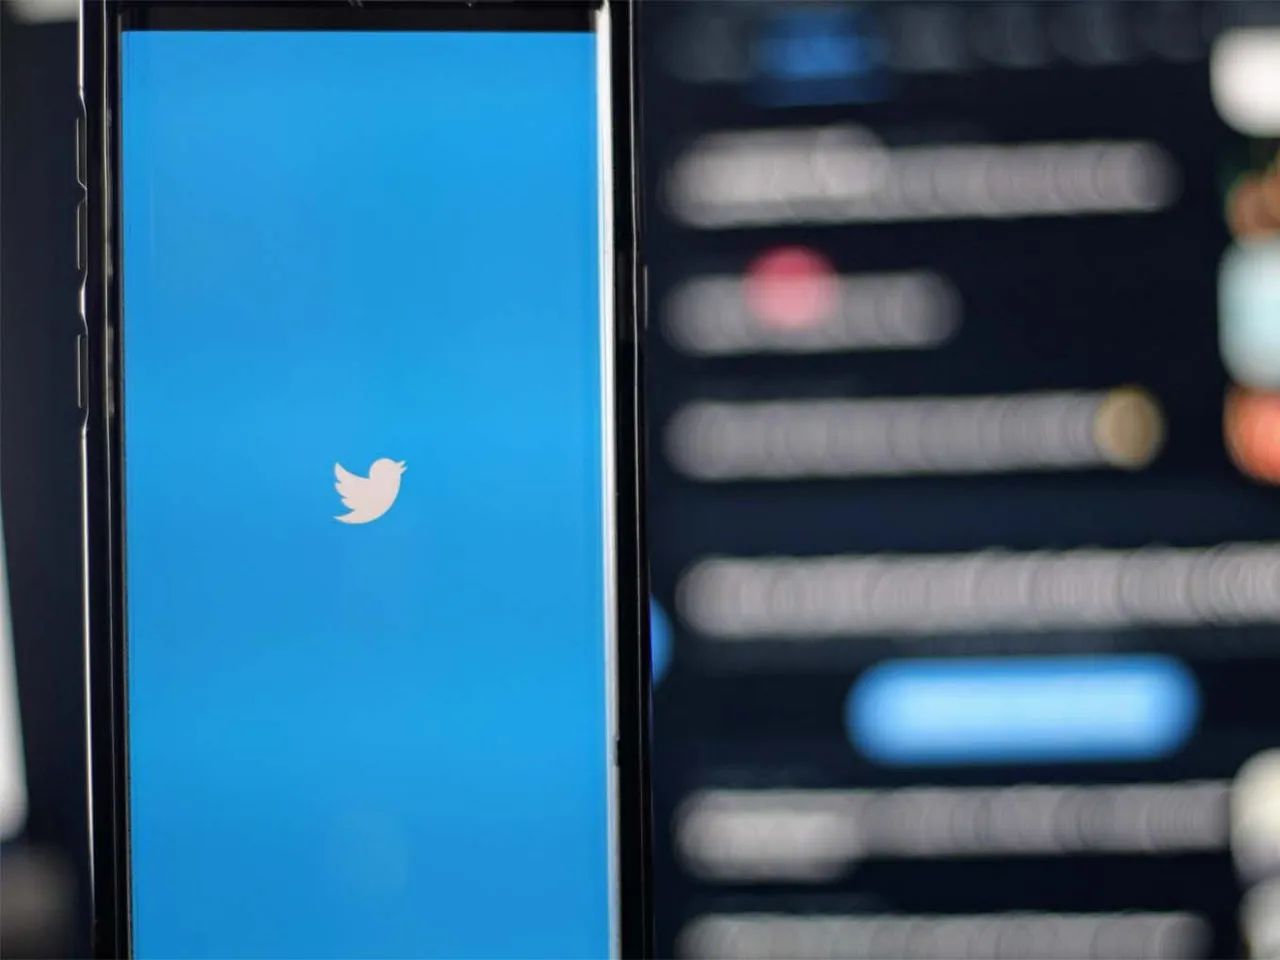 Twitter is now in compliance with IT Rules, says Govt